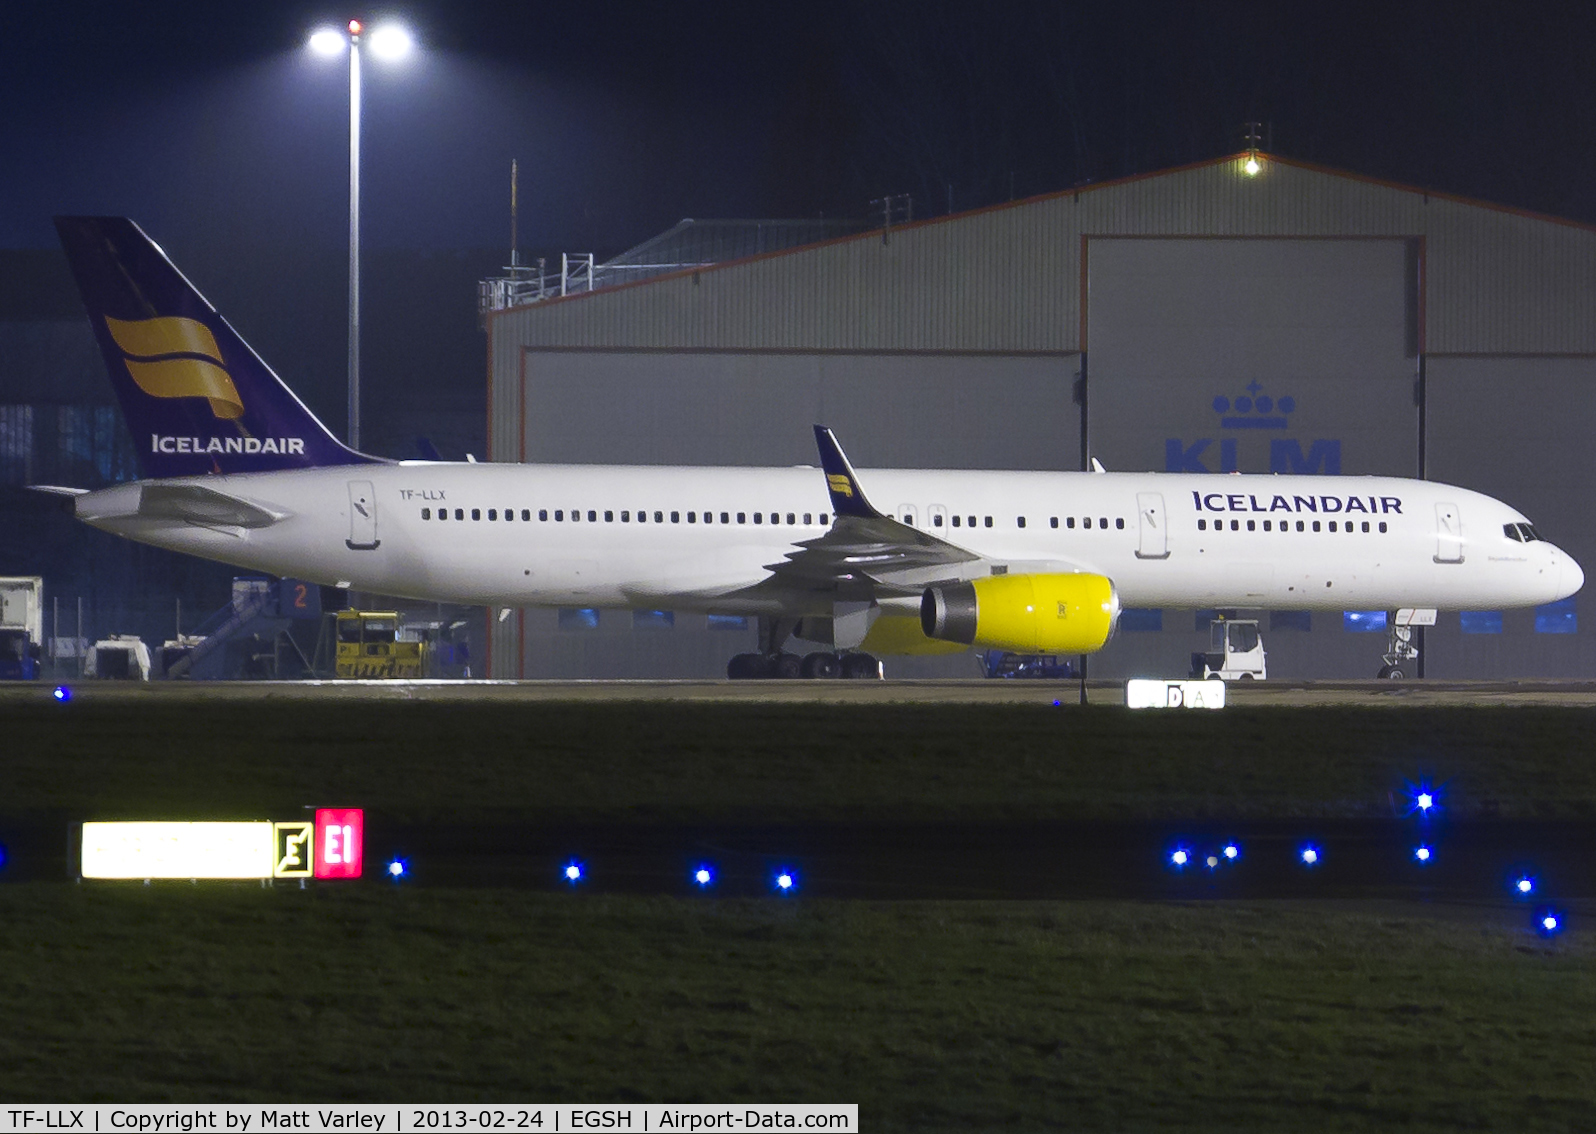 TF-LLX, 2000 Boeing 757-256 C/N 29311, Sat on stand 6 at EGSH after arriving from Gatwick.